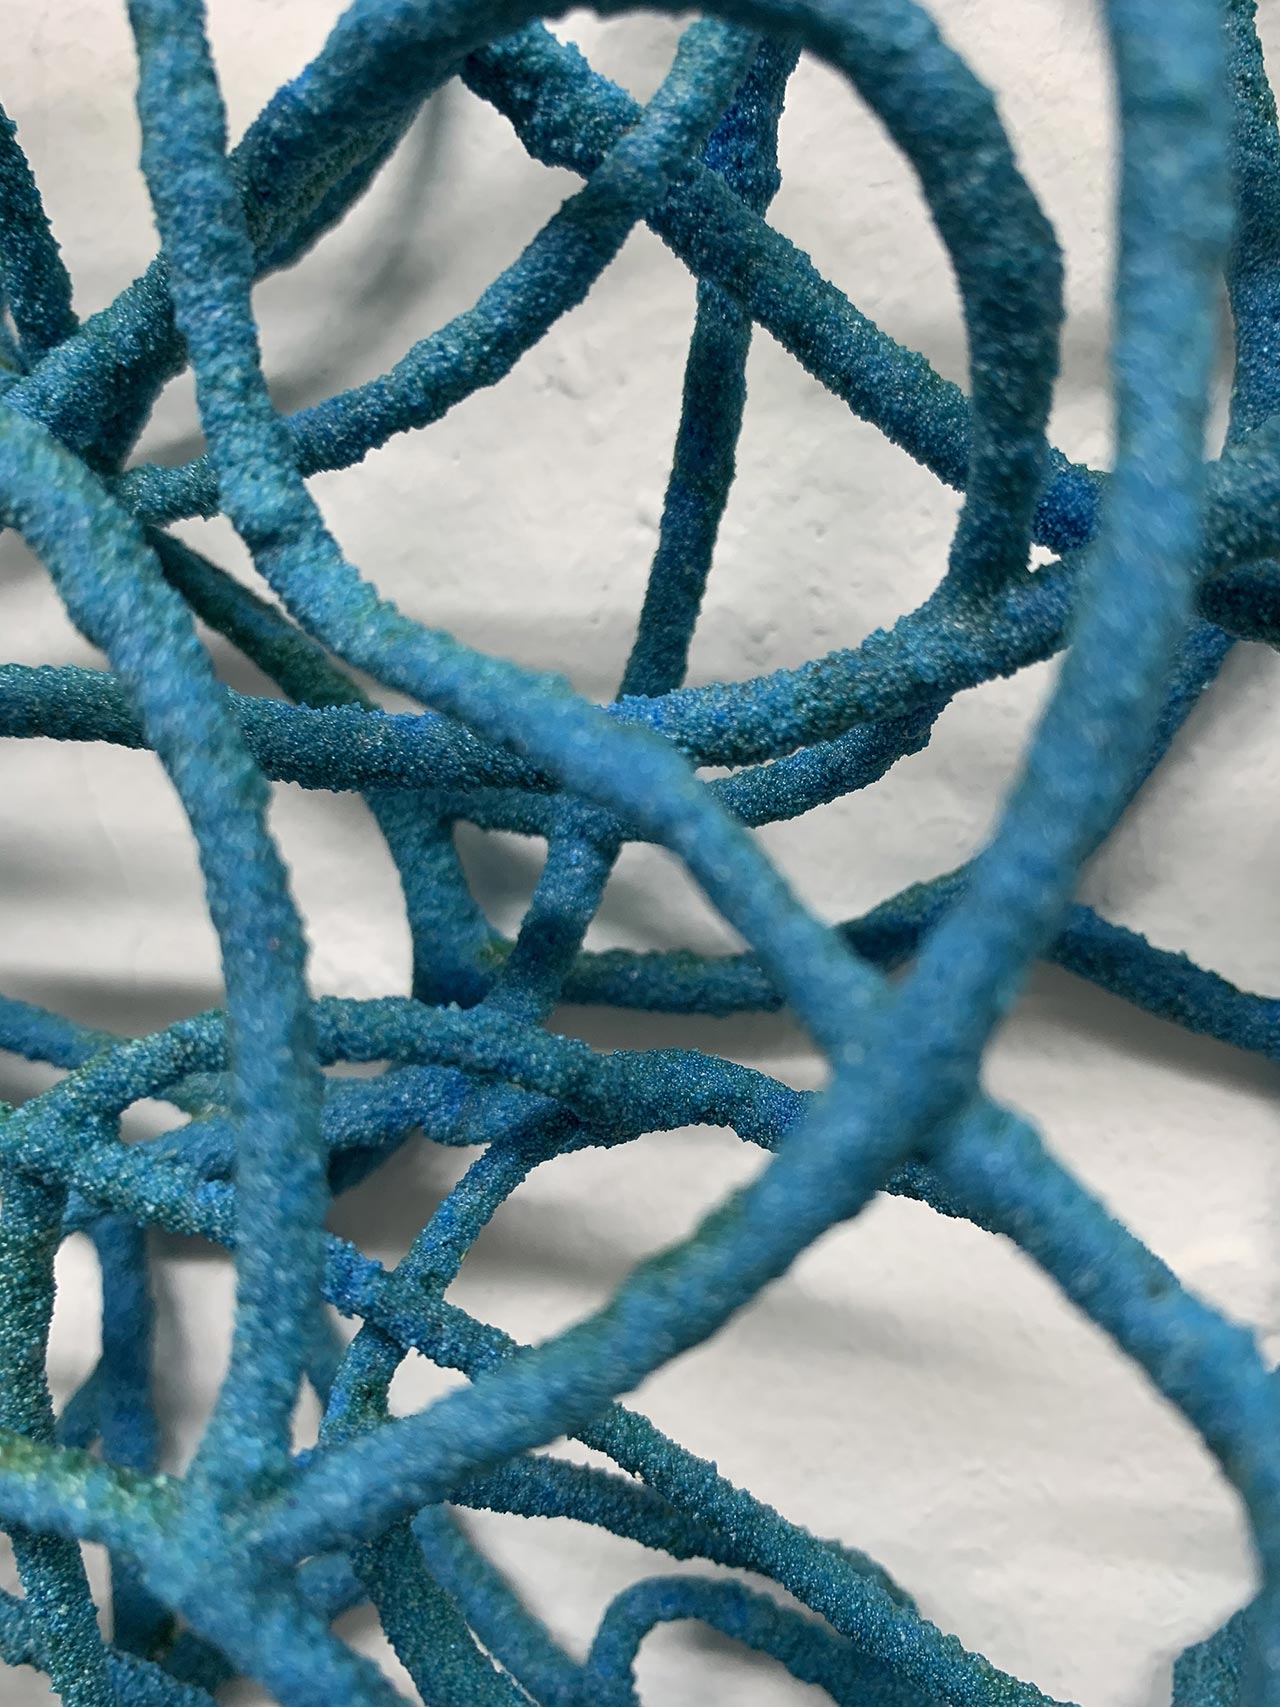 Wire collide 1001 (close up), 2019. Copper wire, solder, sand, varnish, 65x47x5,5 cm | 25½x18½x¼ inches. Courtesy: The Flat – Massimo Carasi. Photo by The Flat.